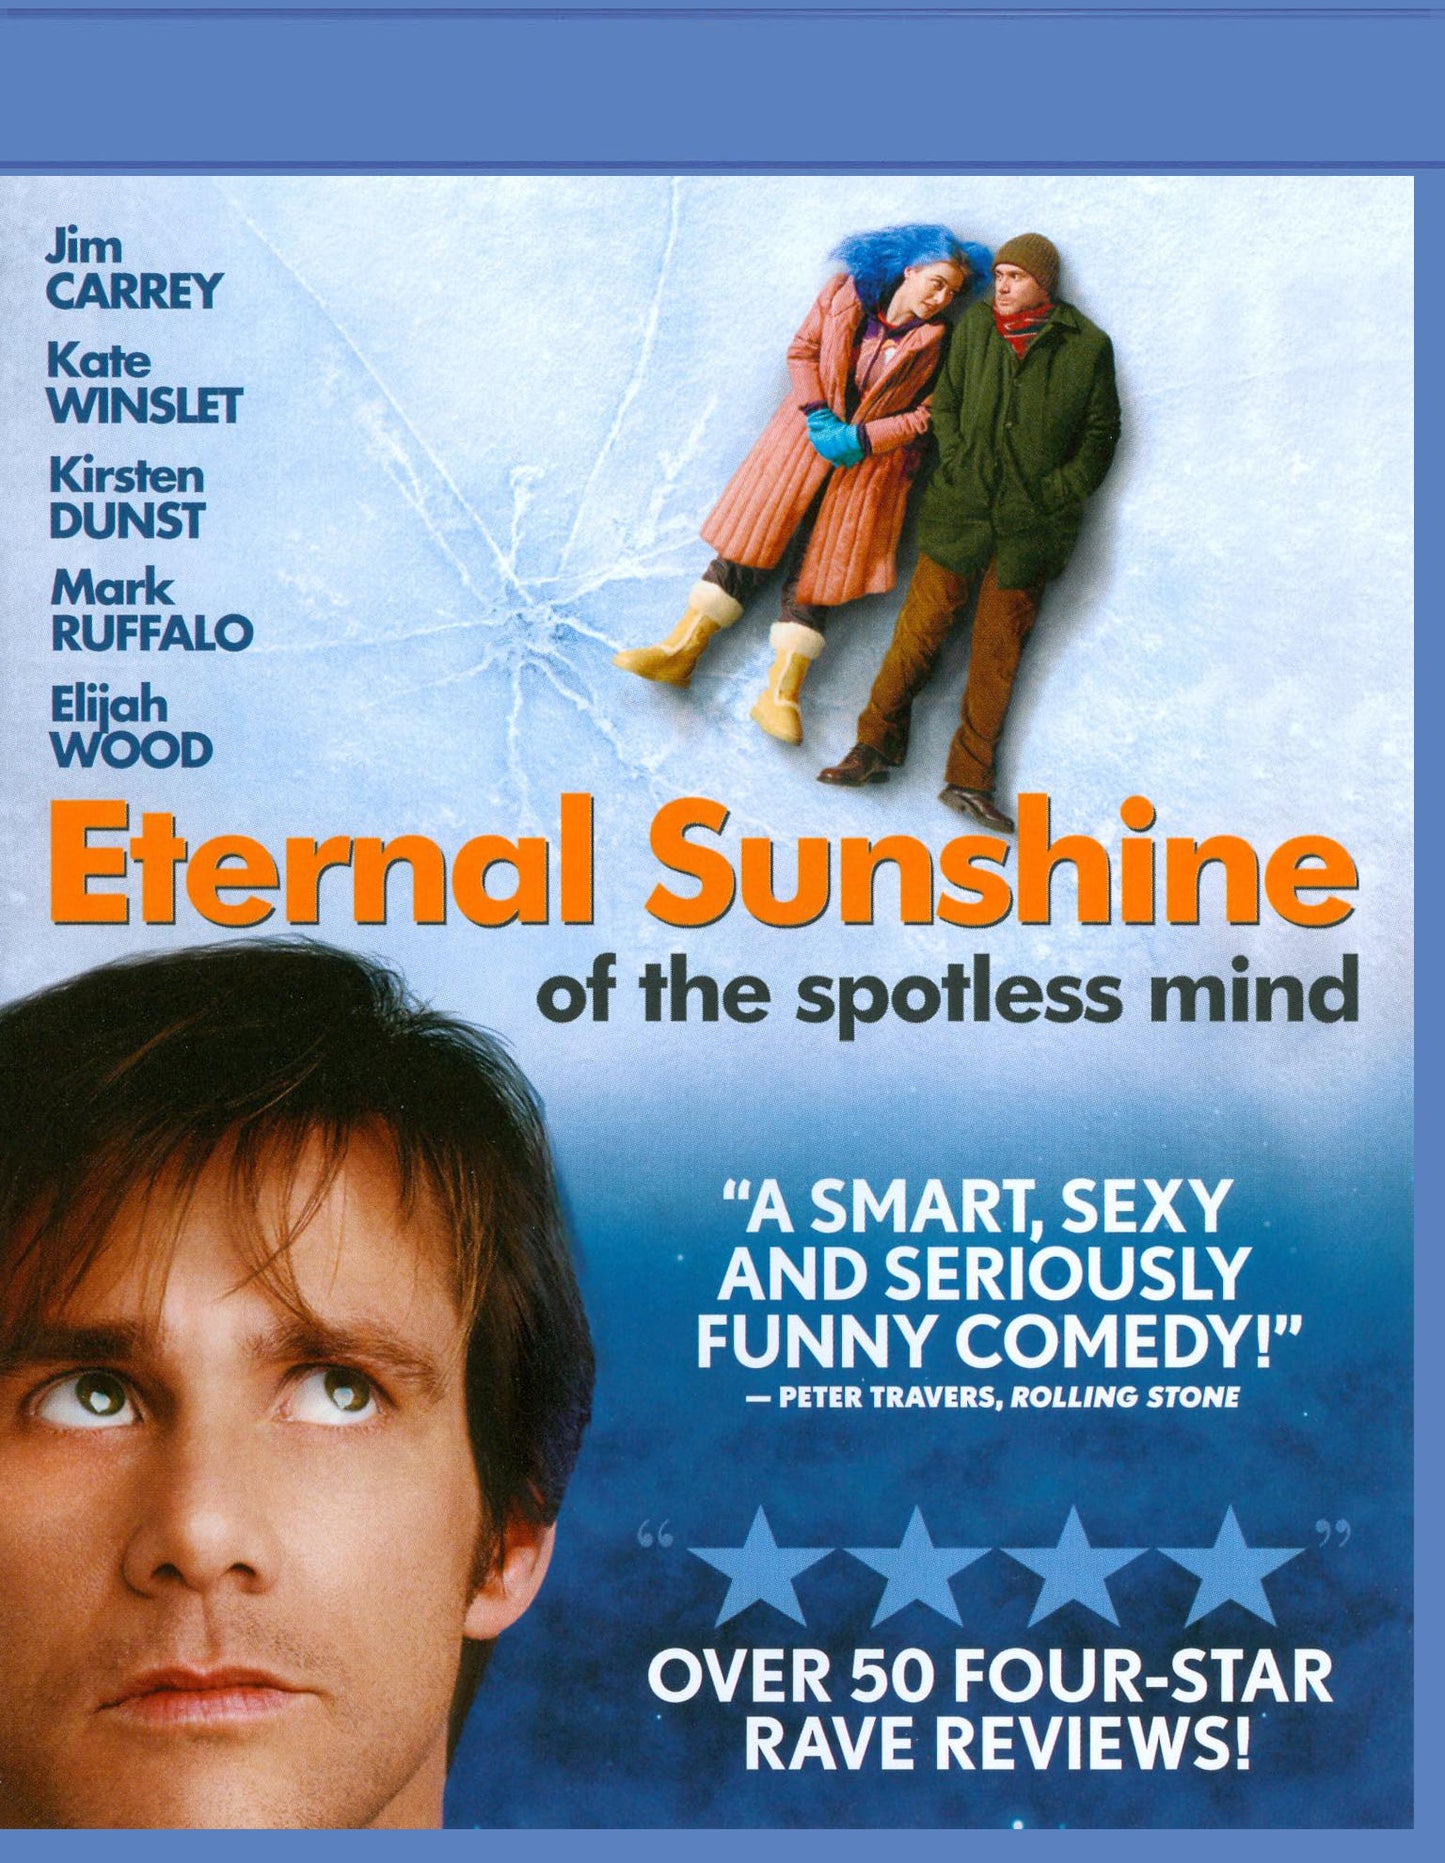 Eternal Sunshine of the Spotless Mind [Blu-ray] cover art